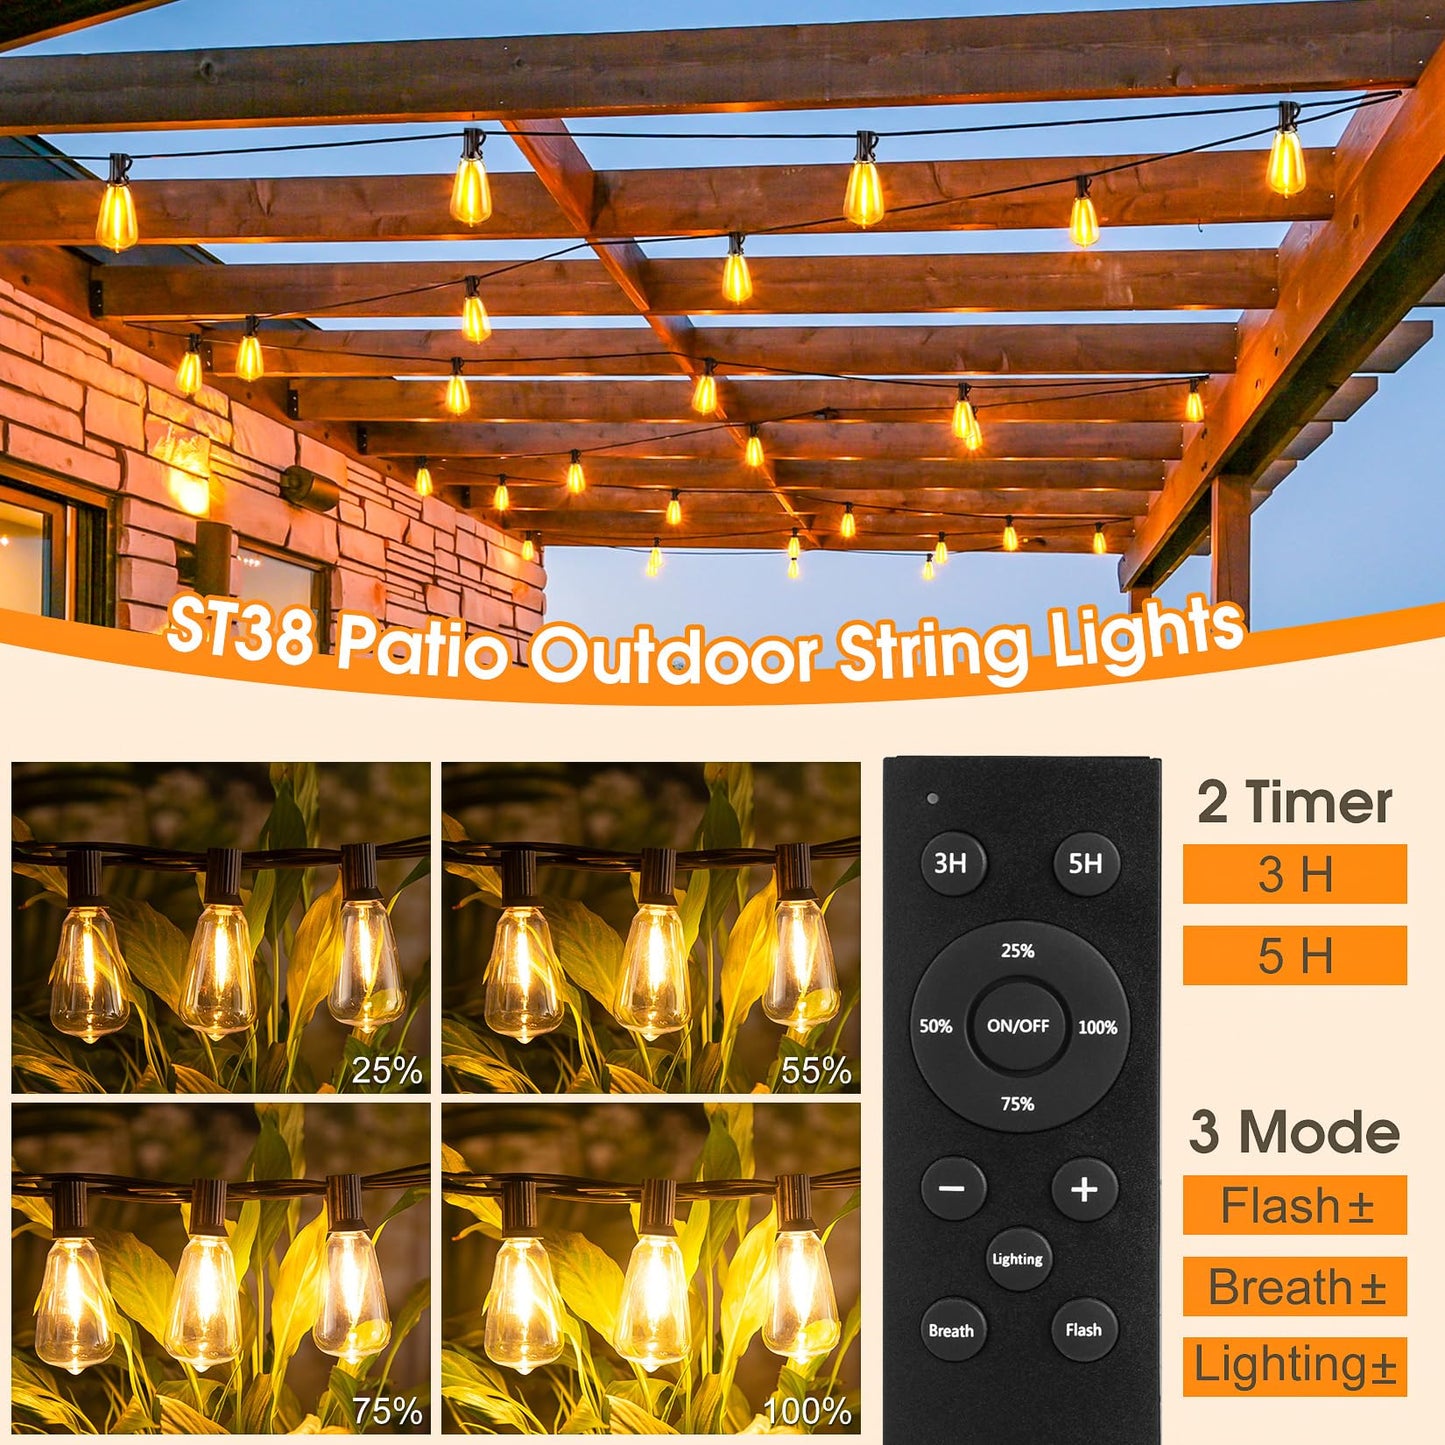 Rovnoes 100FT Outdoor String Lights for Patio, Energy Saving Waterproof Hanging Light with Shatterproof LED Edison Bulbs, Dimmable Timer Outside Lighting with Remote for Backyard Bistro Cafe